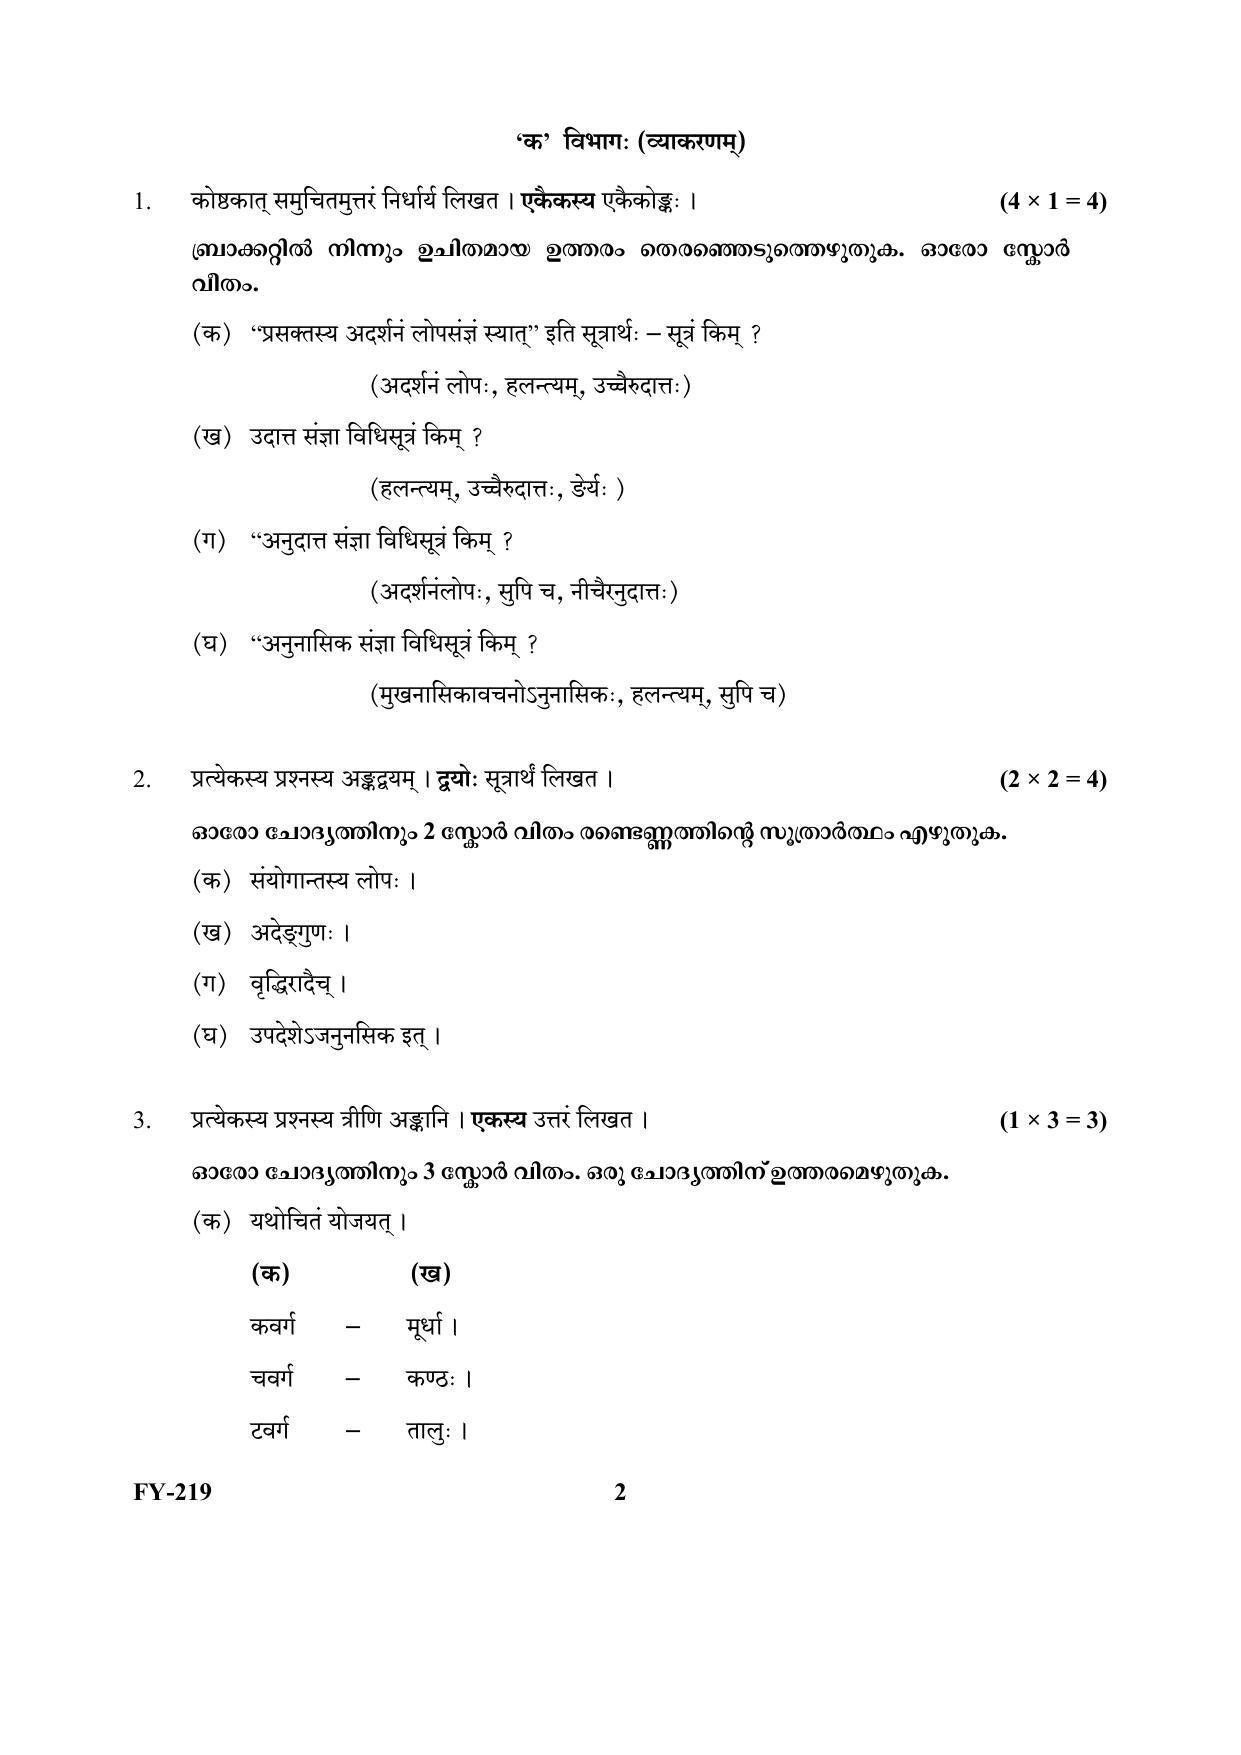 Kerala Plus One (Class 11th) Part-III Sanskrit Sasthra-Optional Question Paper 2021 - Page 2